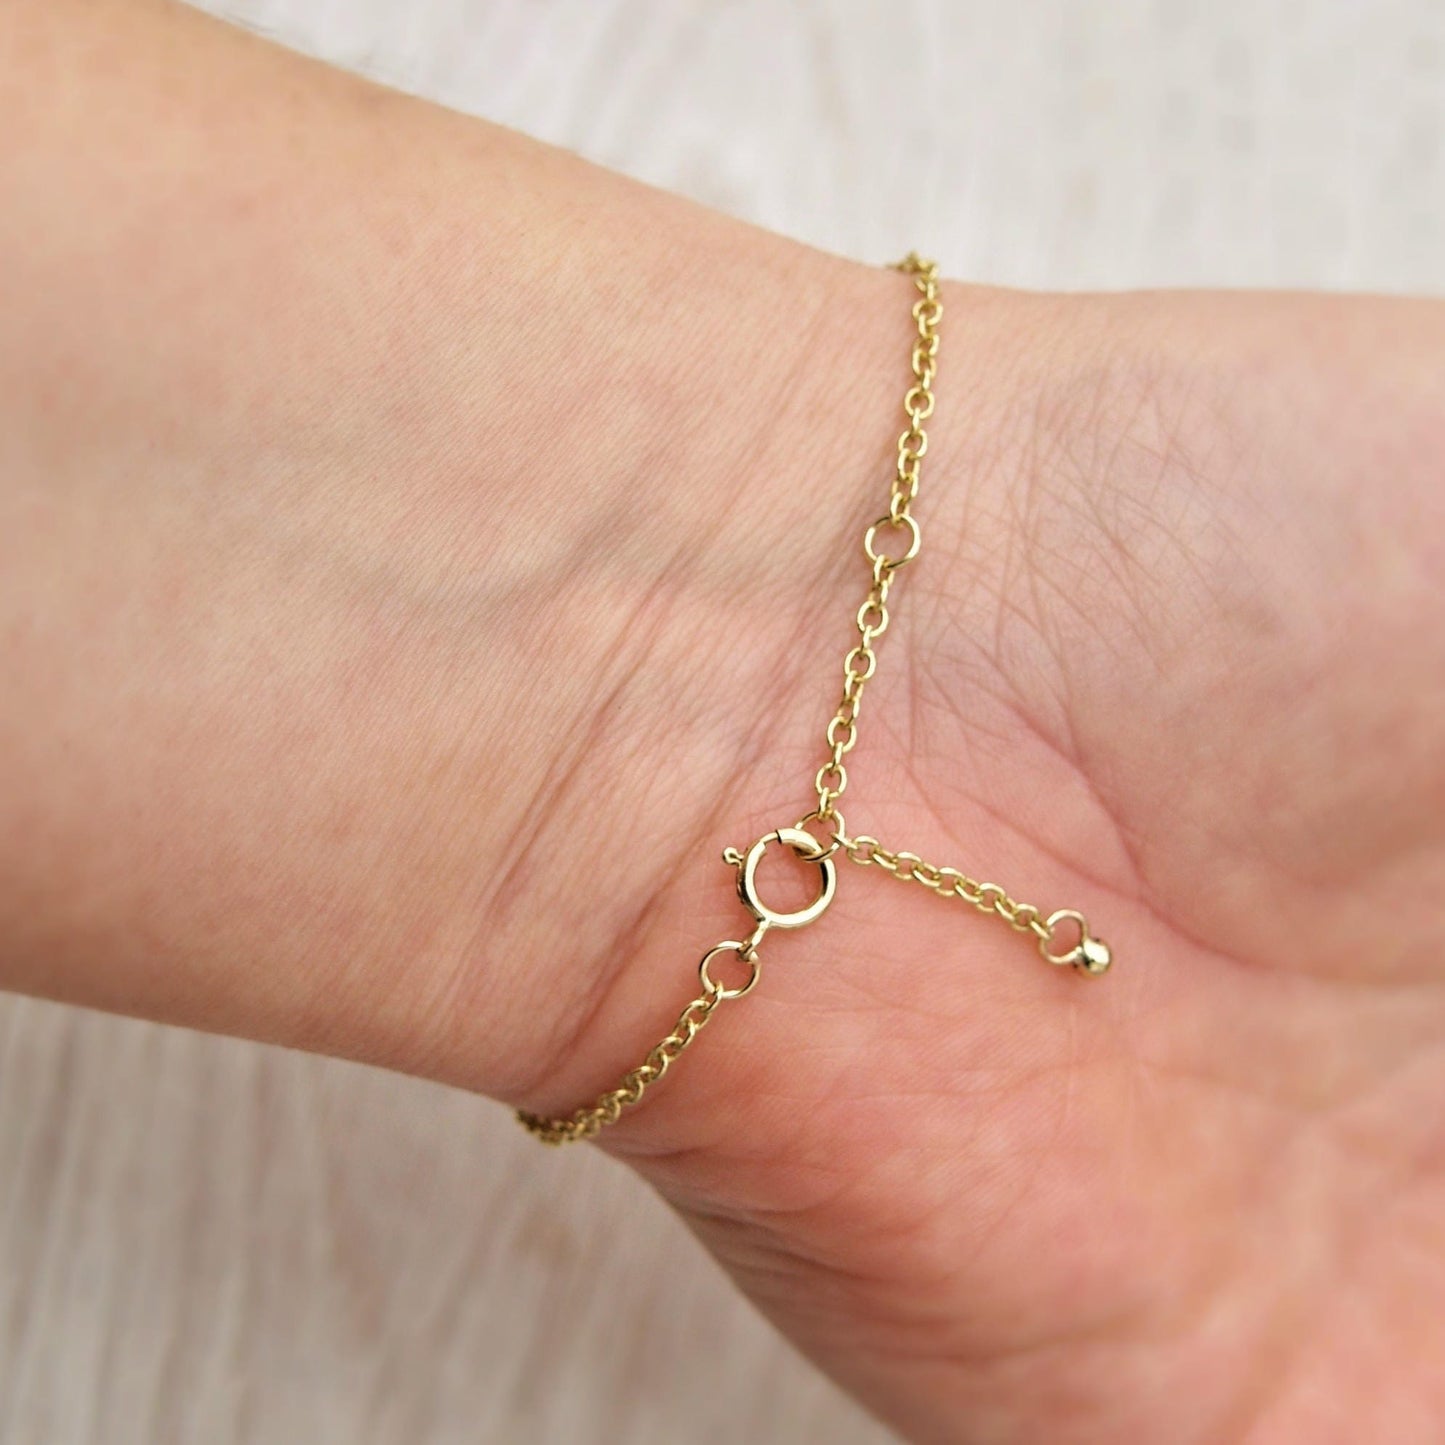 Handmade to order - 9ct yellow gold chain bracelet with a small size petal charm